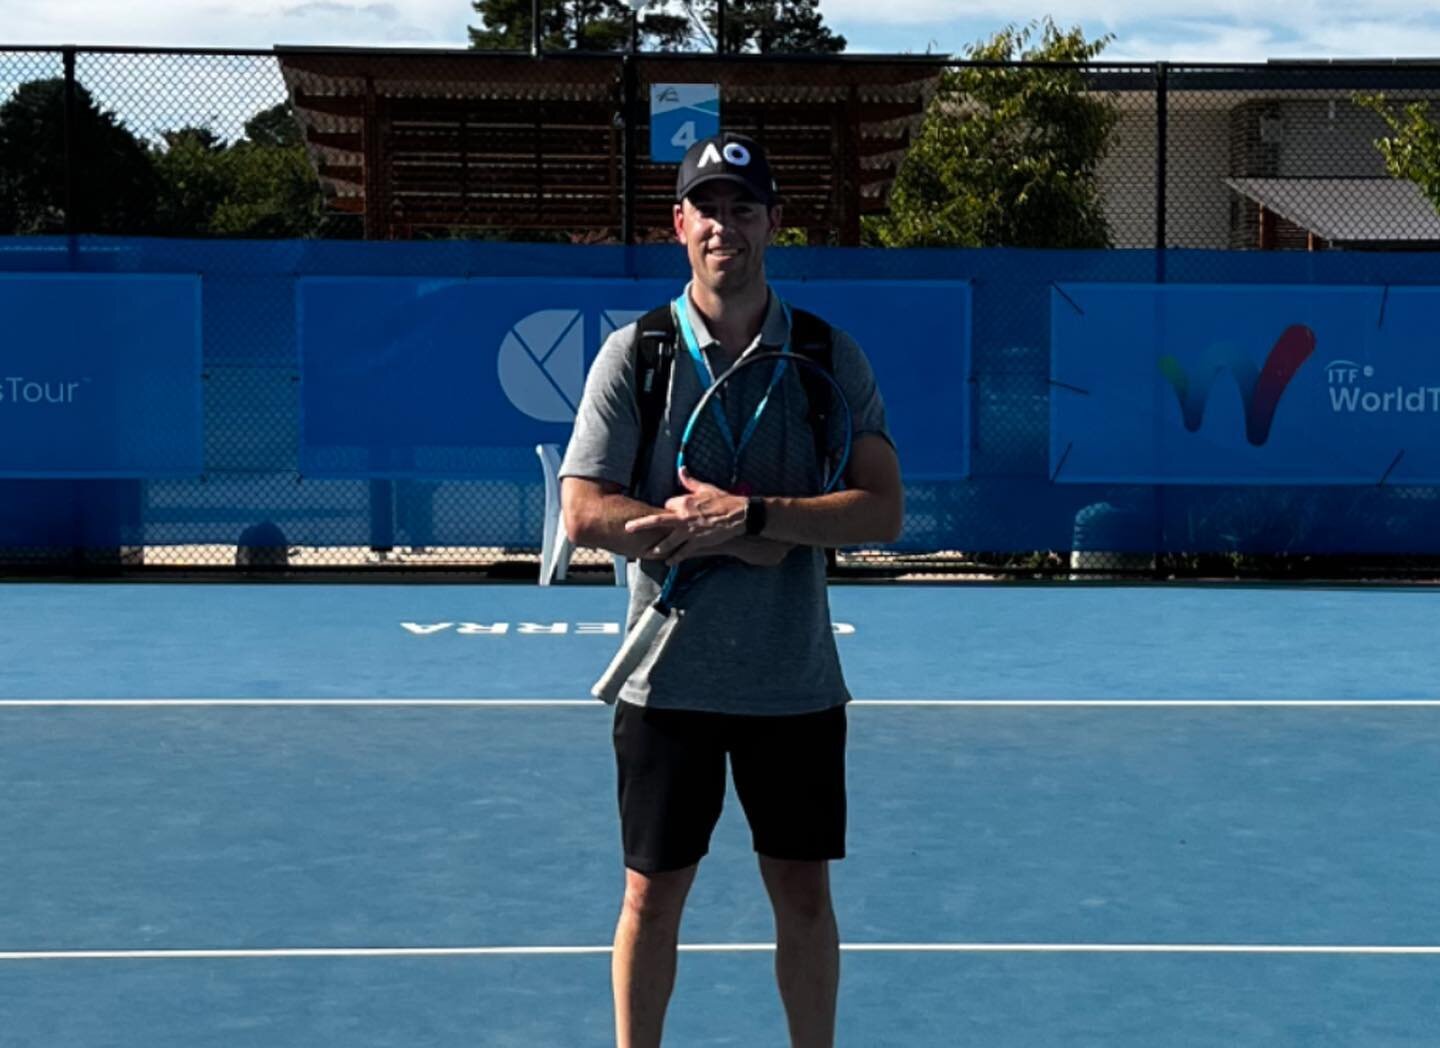 For the past fortnight Richie has been physio for two pro tour tennis tournaments in Canberra. A great experience. 🎾 

He&rsquo;s now returned and available for appointments again this week. Book online or phone reception.